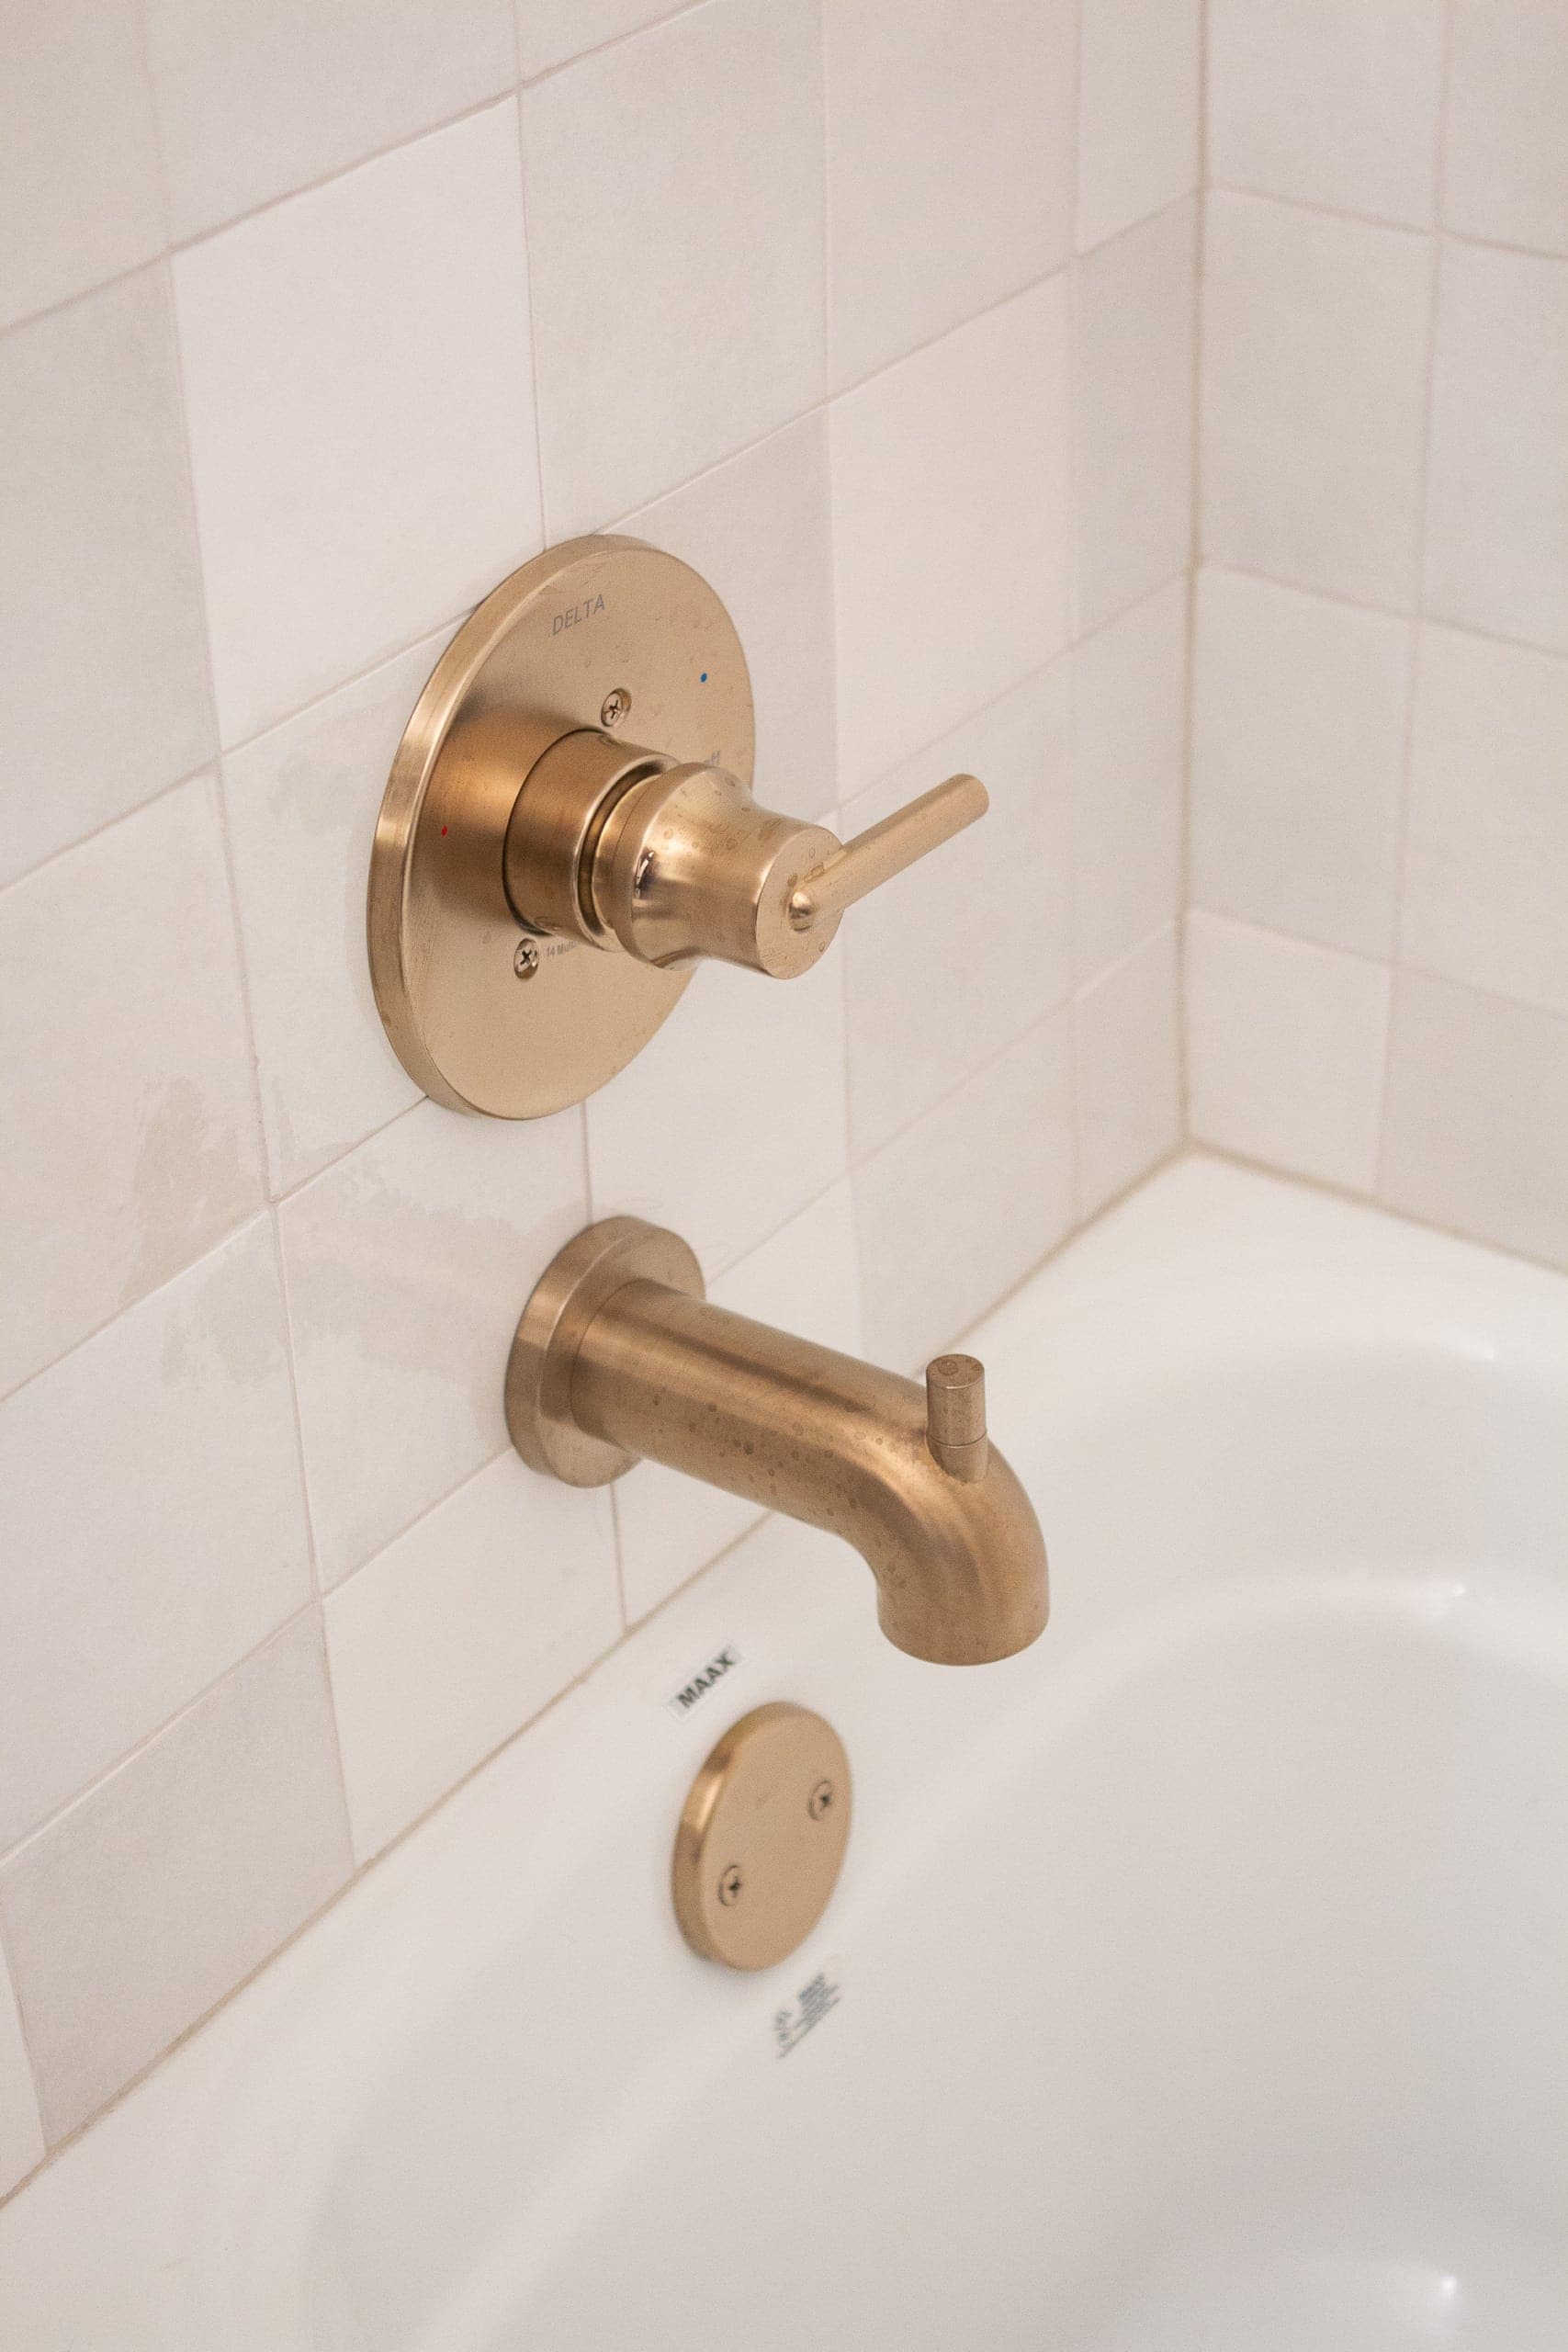 Brass shower hardware with white tile